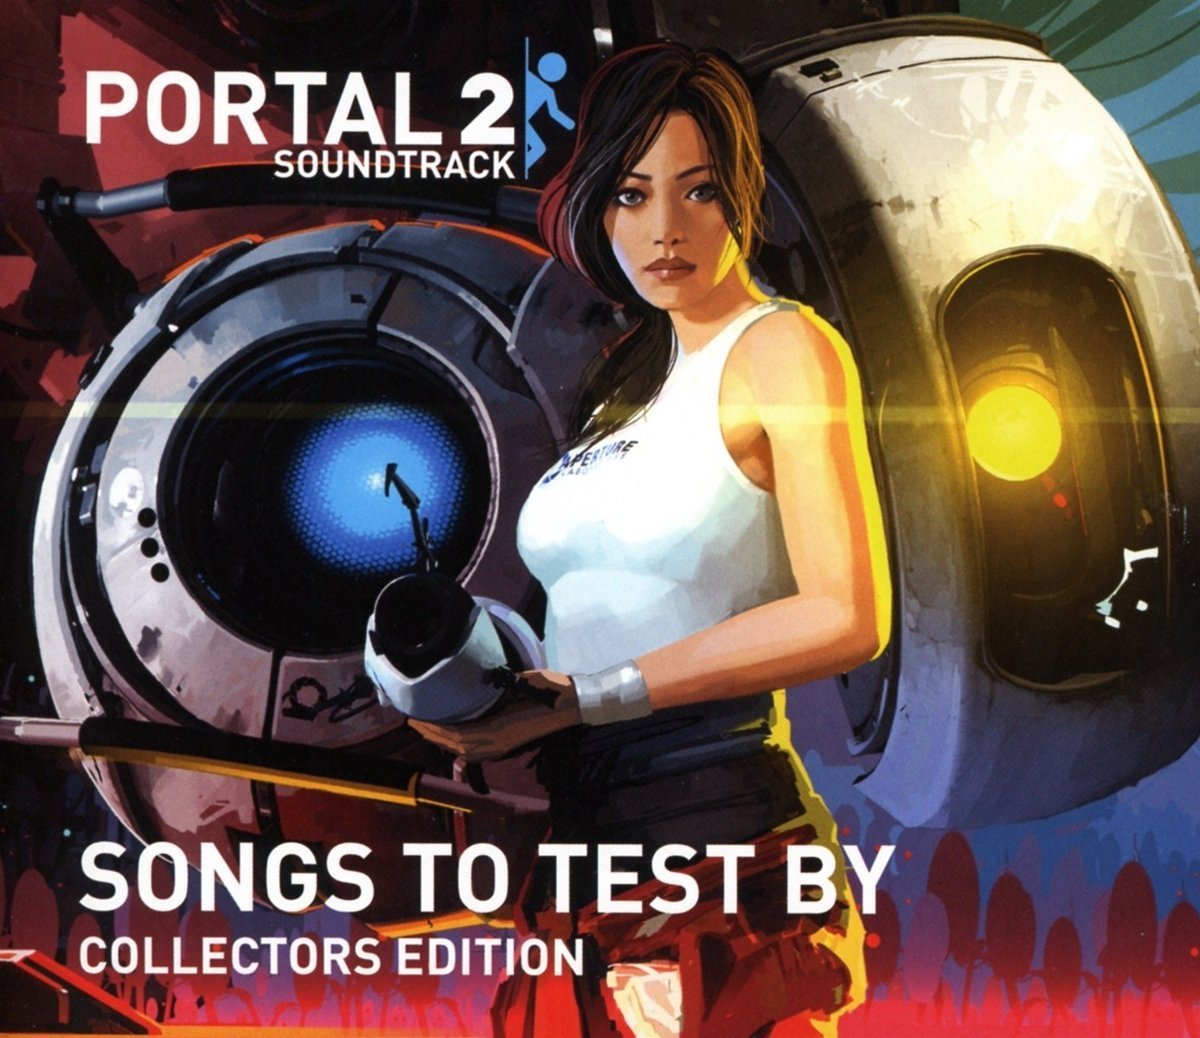 Portal 2: Songs to Test By — Aperture Science Psychoacoustic Laboratories (Mike Morasky & Others)Although a lot of Portal's best musical moments are procedurally generated, this ver. is still very enjoyable. The extra disc on the collector's ed. has songs from the 1st game too.